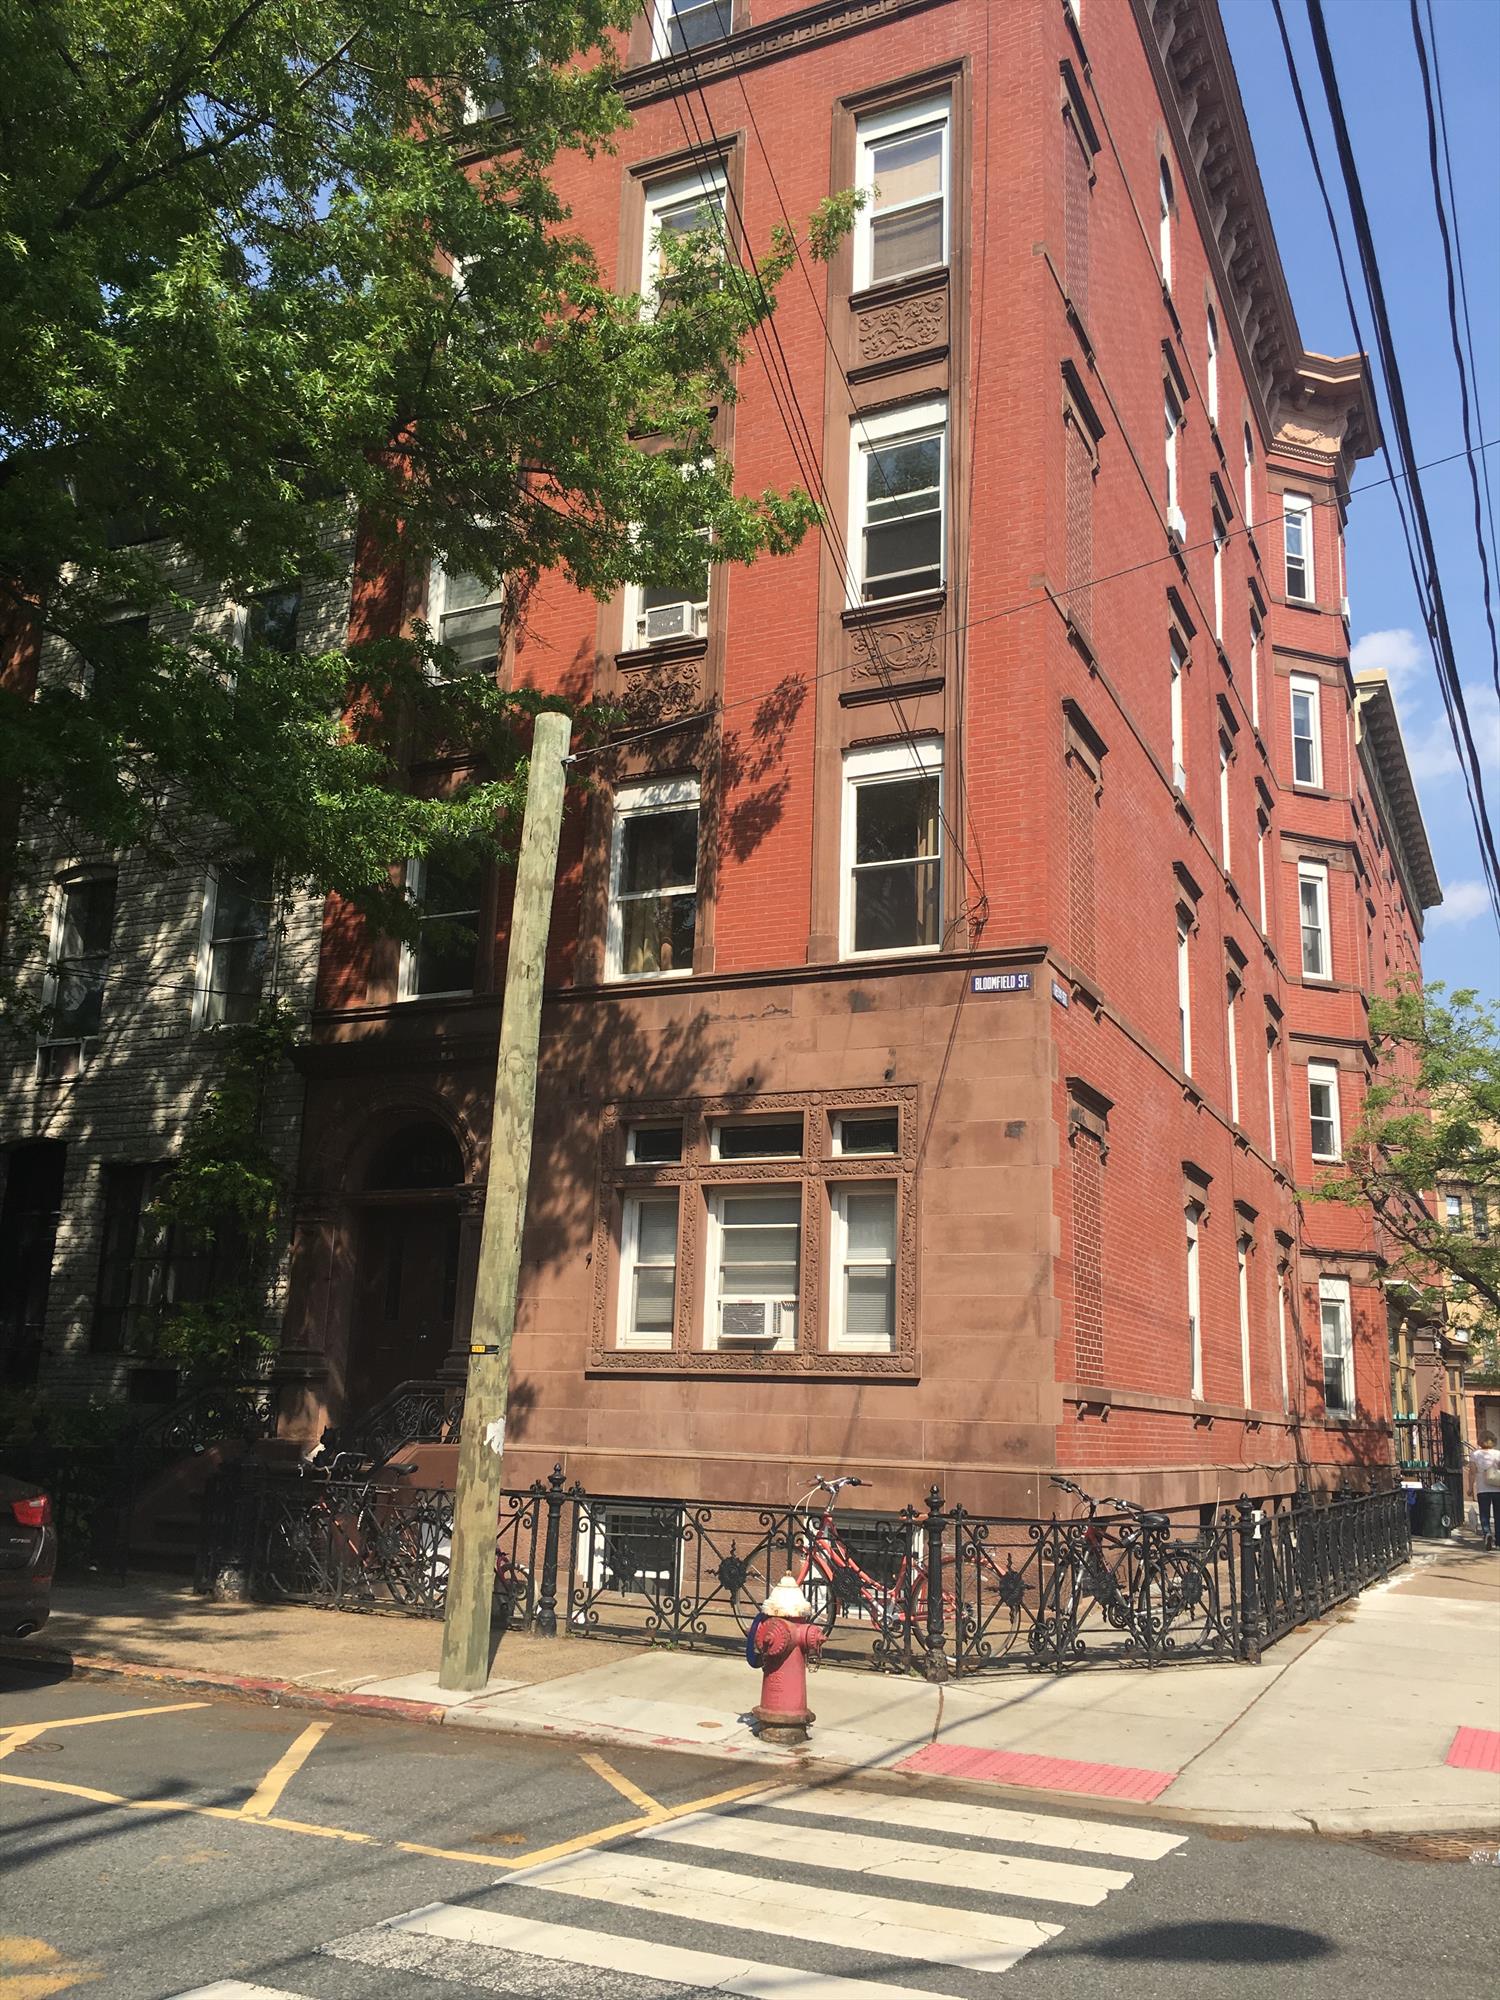 Large 3 bedroom 1 bath on upper Bloomfield Street, lots of windows, eat in kitchen, washer/dryer in unit.
One block to bus transportation, just minutes to Ferry and Hoboken's waterfront.
BROKER FEE PAID BY LANDLORD